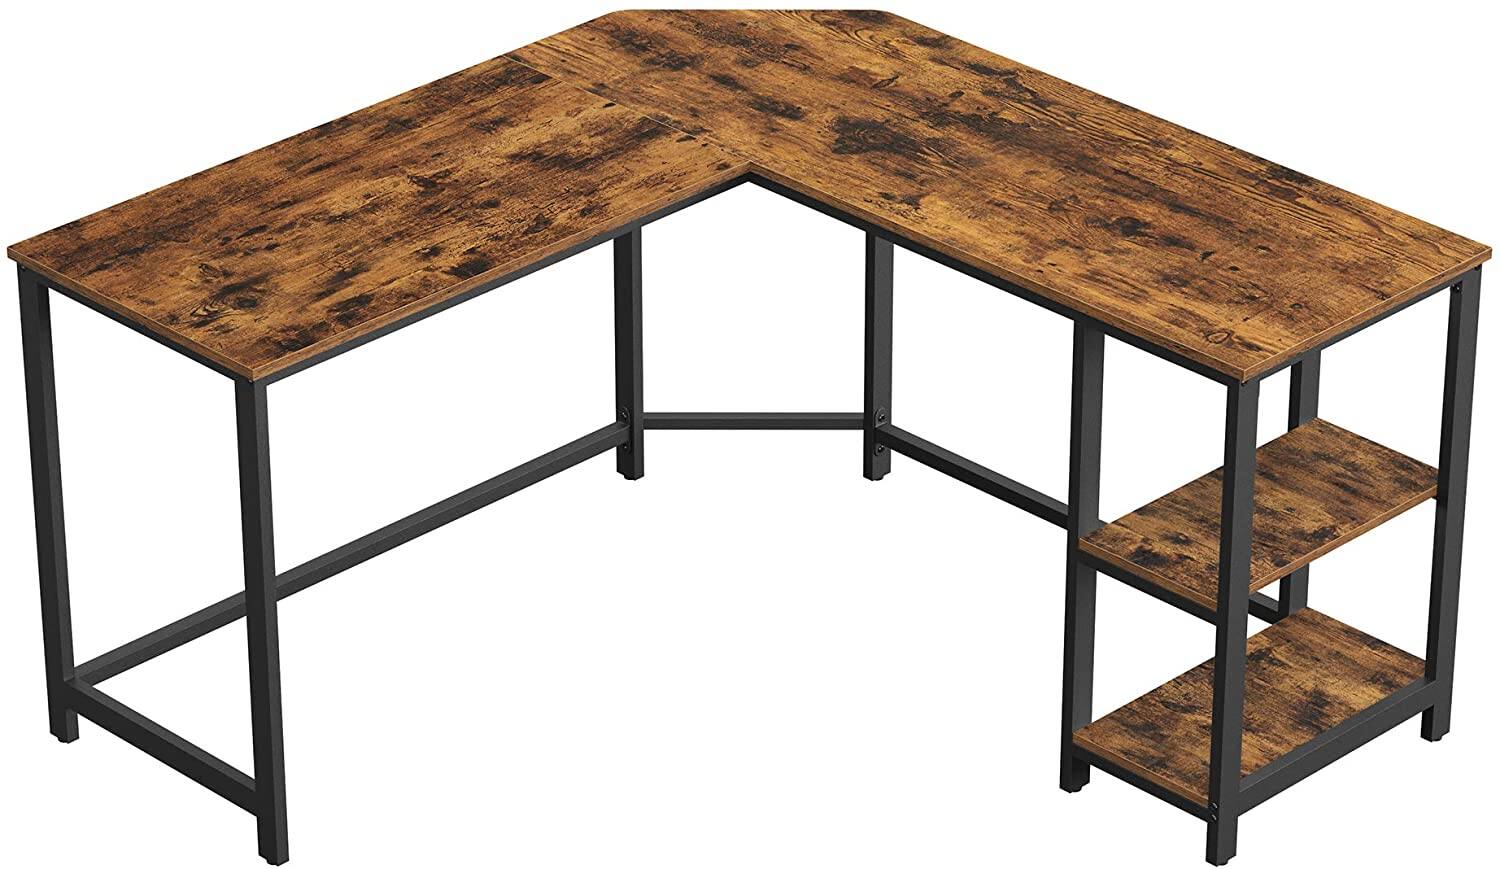 VASAGLE 54'' L-Shaped Desk with Shelves / Monitor Stand Options from $94.49 + Free Shipping